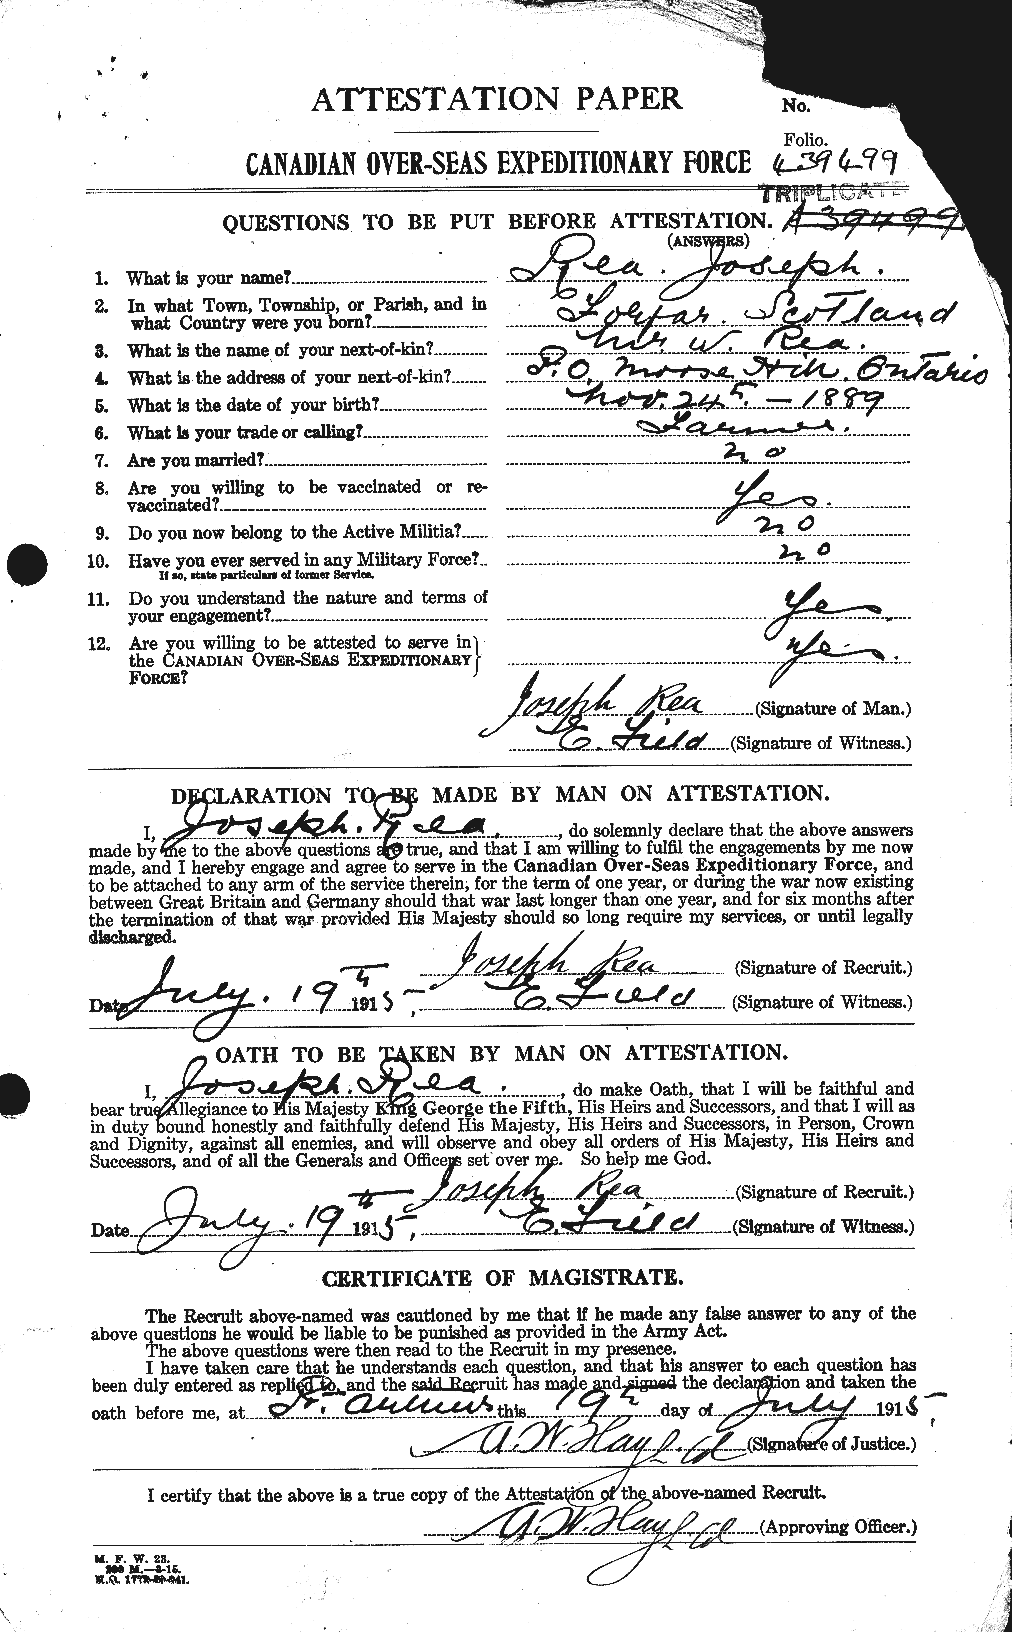 Personnel Records of the First World War - CEF 597300a